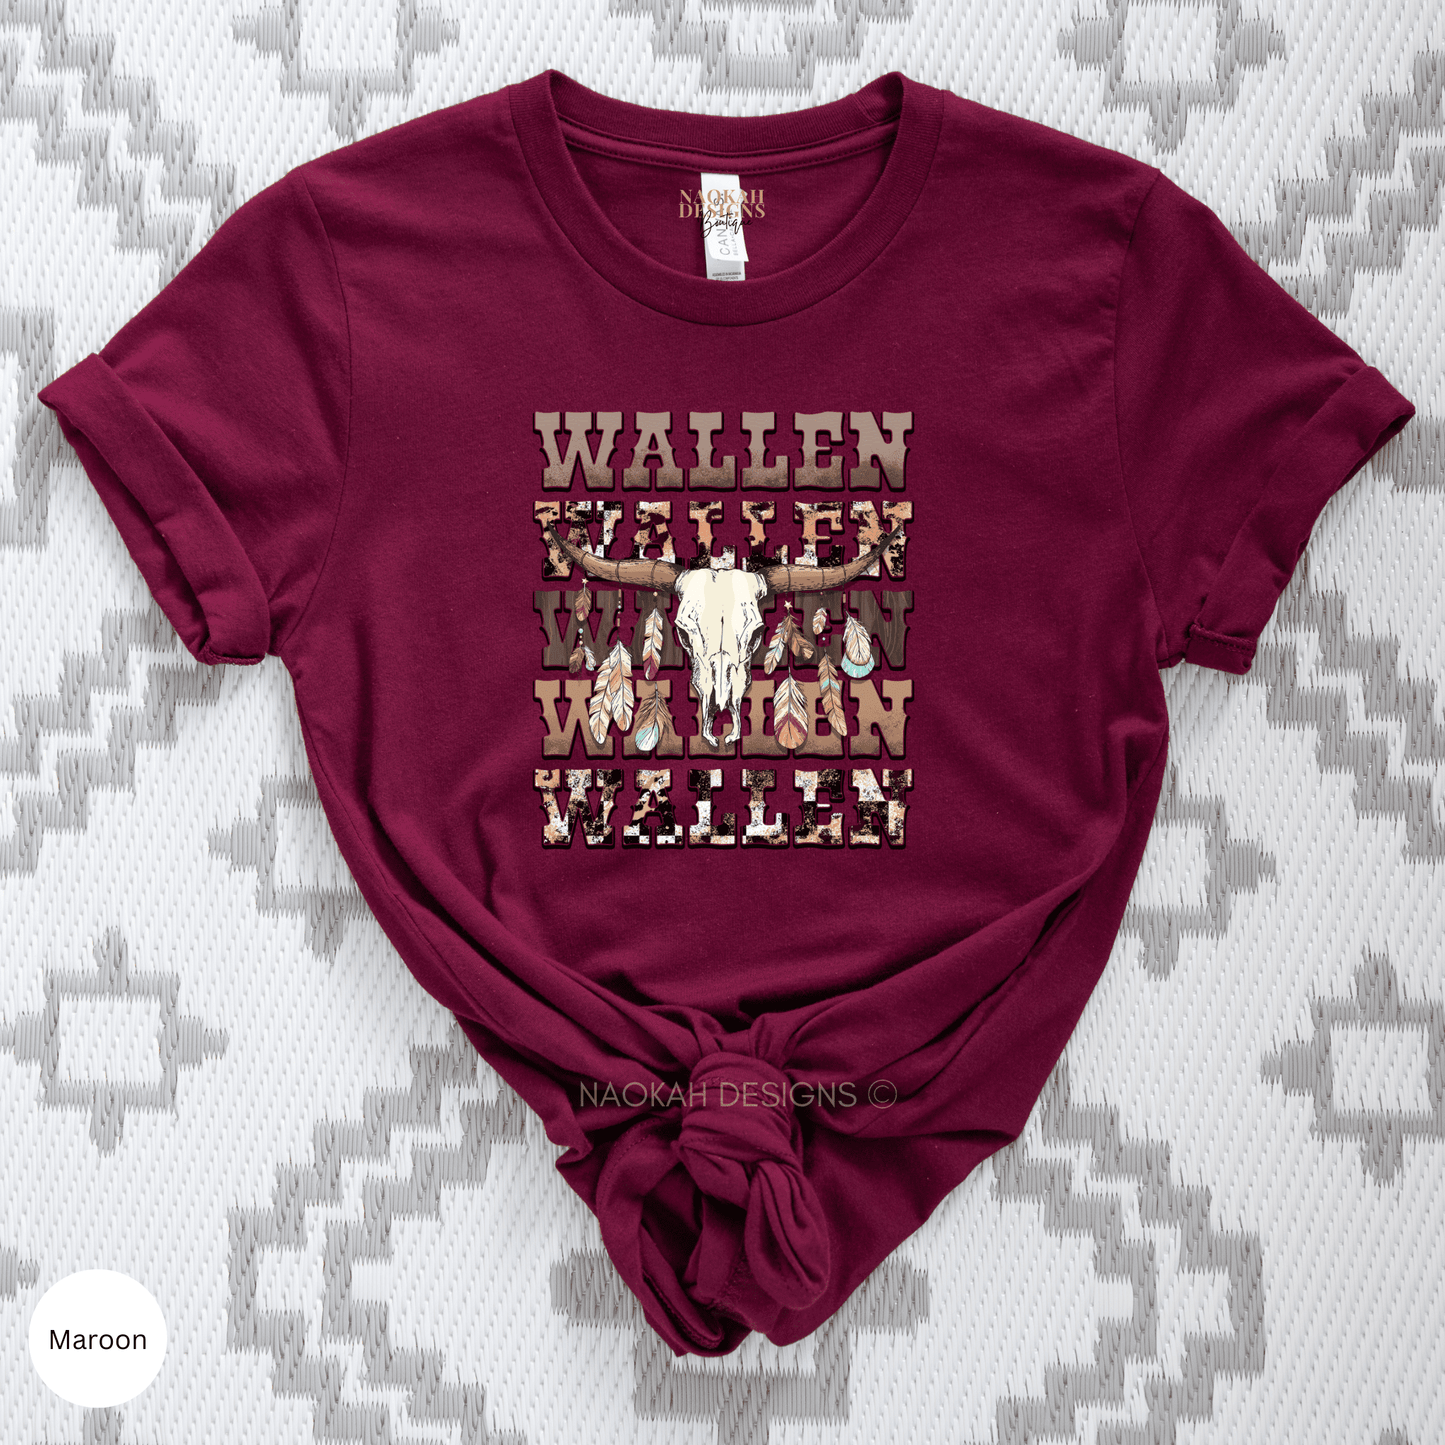 Wallen Shirt, Wallen Swag, Country Shirt, Country Concert Shirt, One Night At A Time Shirt, Wasted On You, Wallen Bullskull Shirt, somebodys problem shirt, wasted on you shirt, country fan shirt, gift for country fan, chasing you whiskey shirt